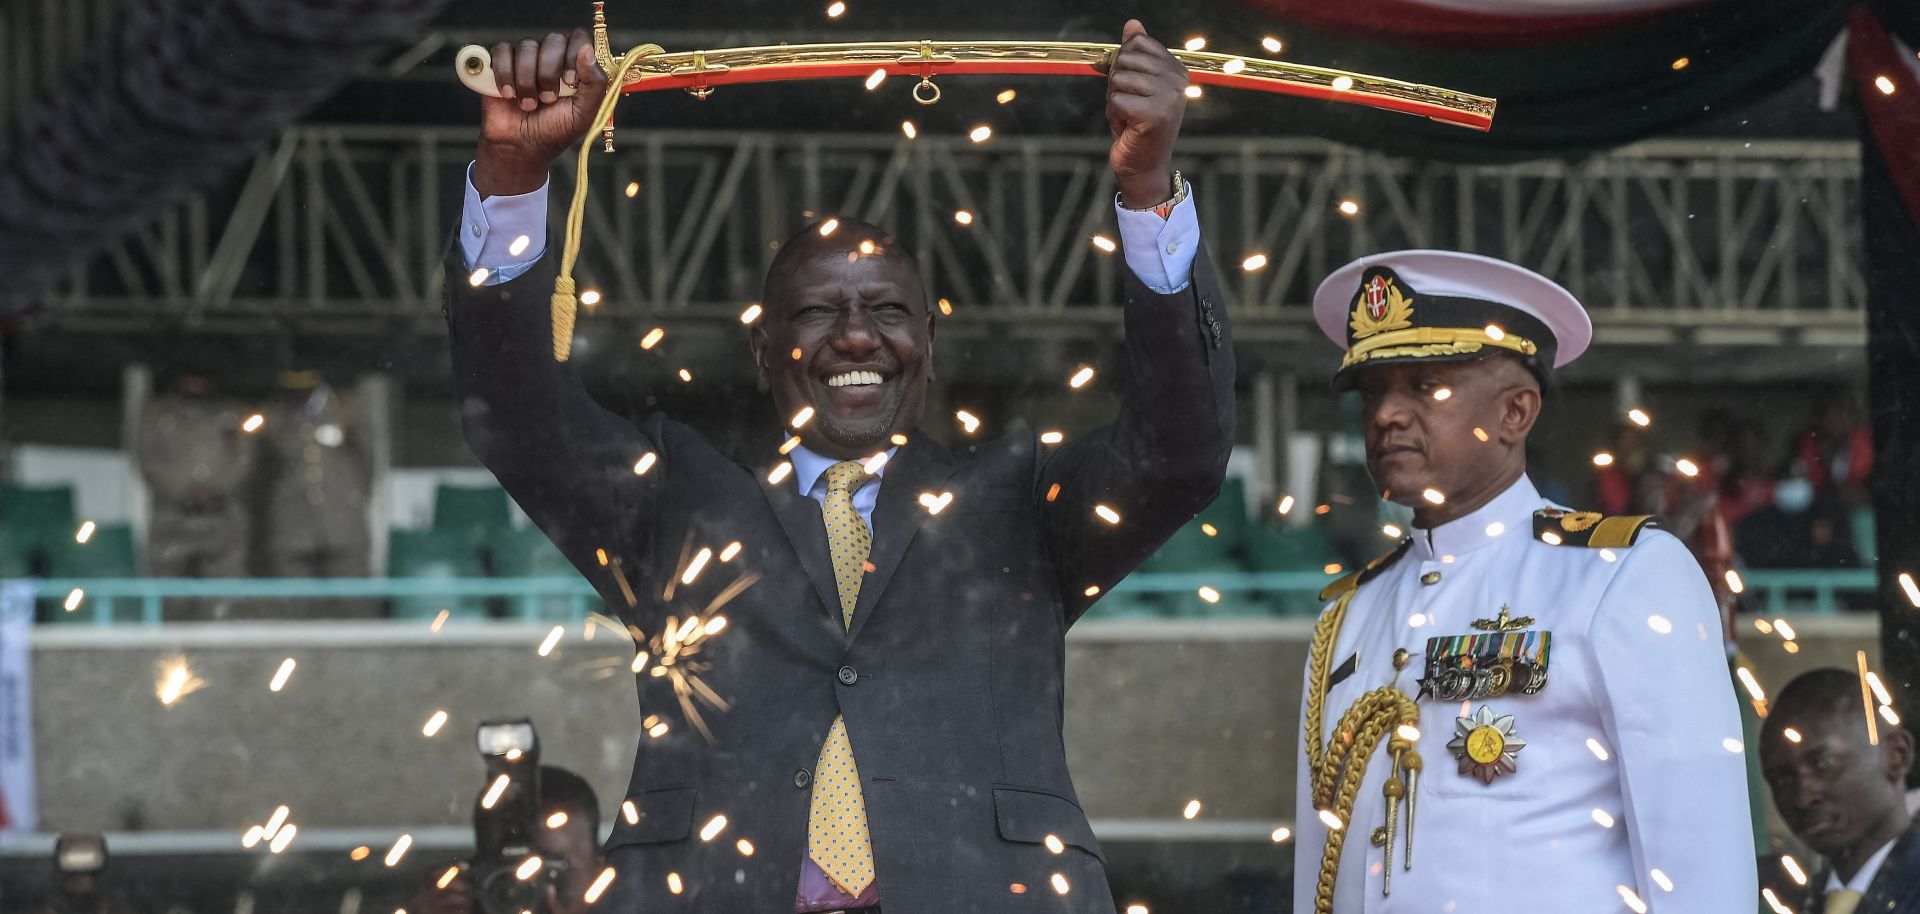 Incoming Kenyan President William Ruto lifts a sword at the Moi International Sports Center Kasarani in Nairobi, Kenya, during his inauguration ceremony on Sept. 13, 2022.